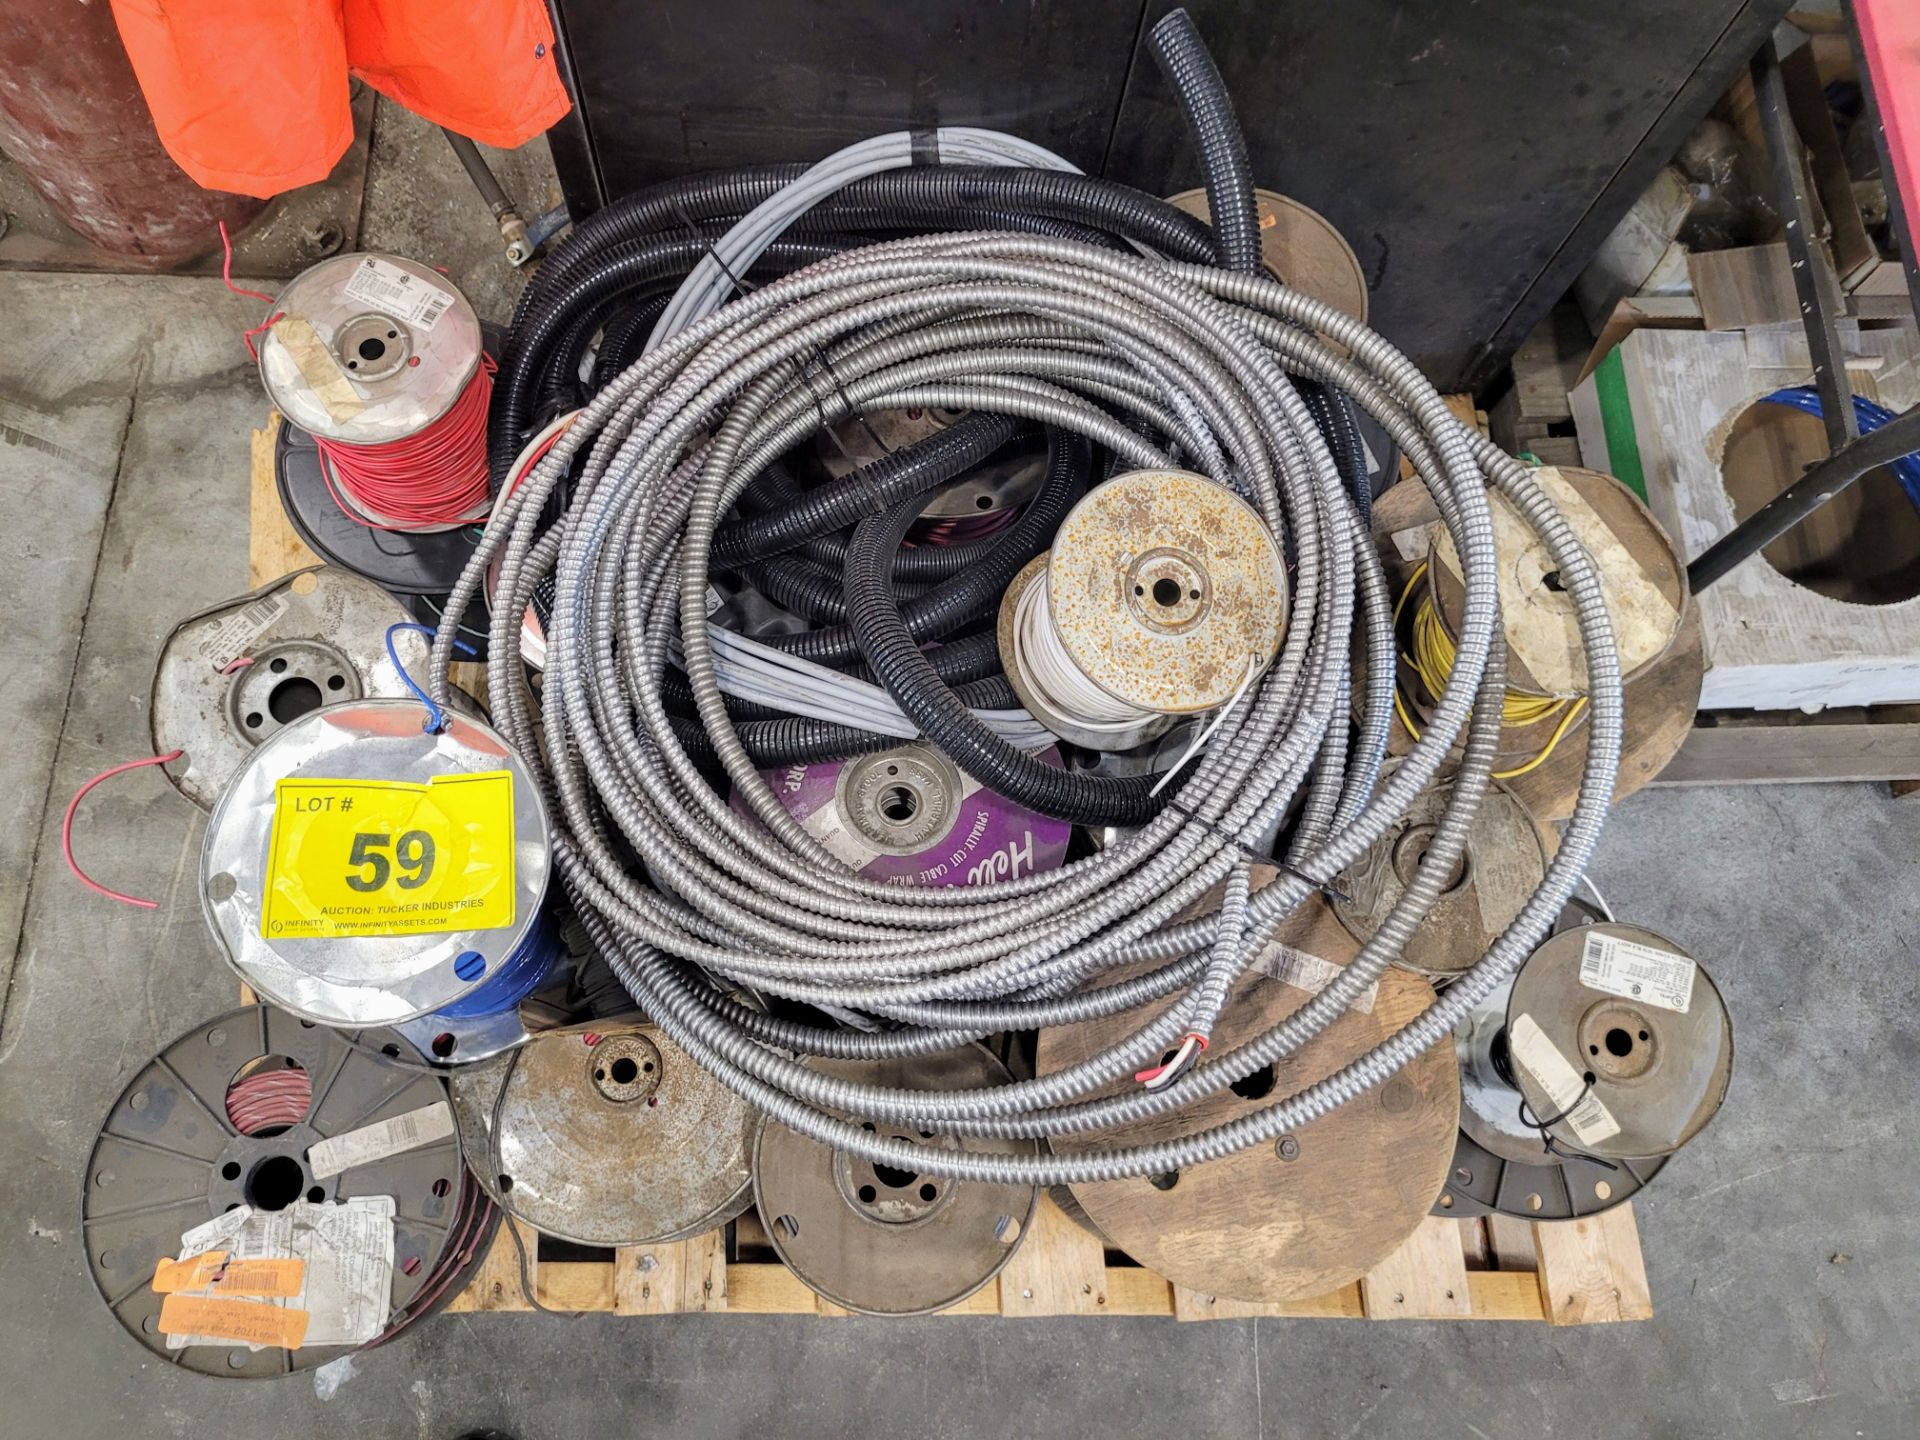 PALLET OF ASSORTED WIRE, CABLES, ETC. - Image 6 of 6